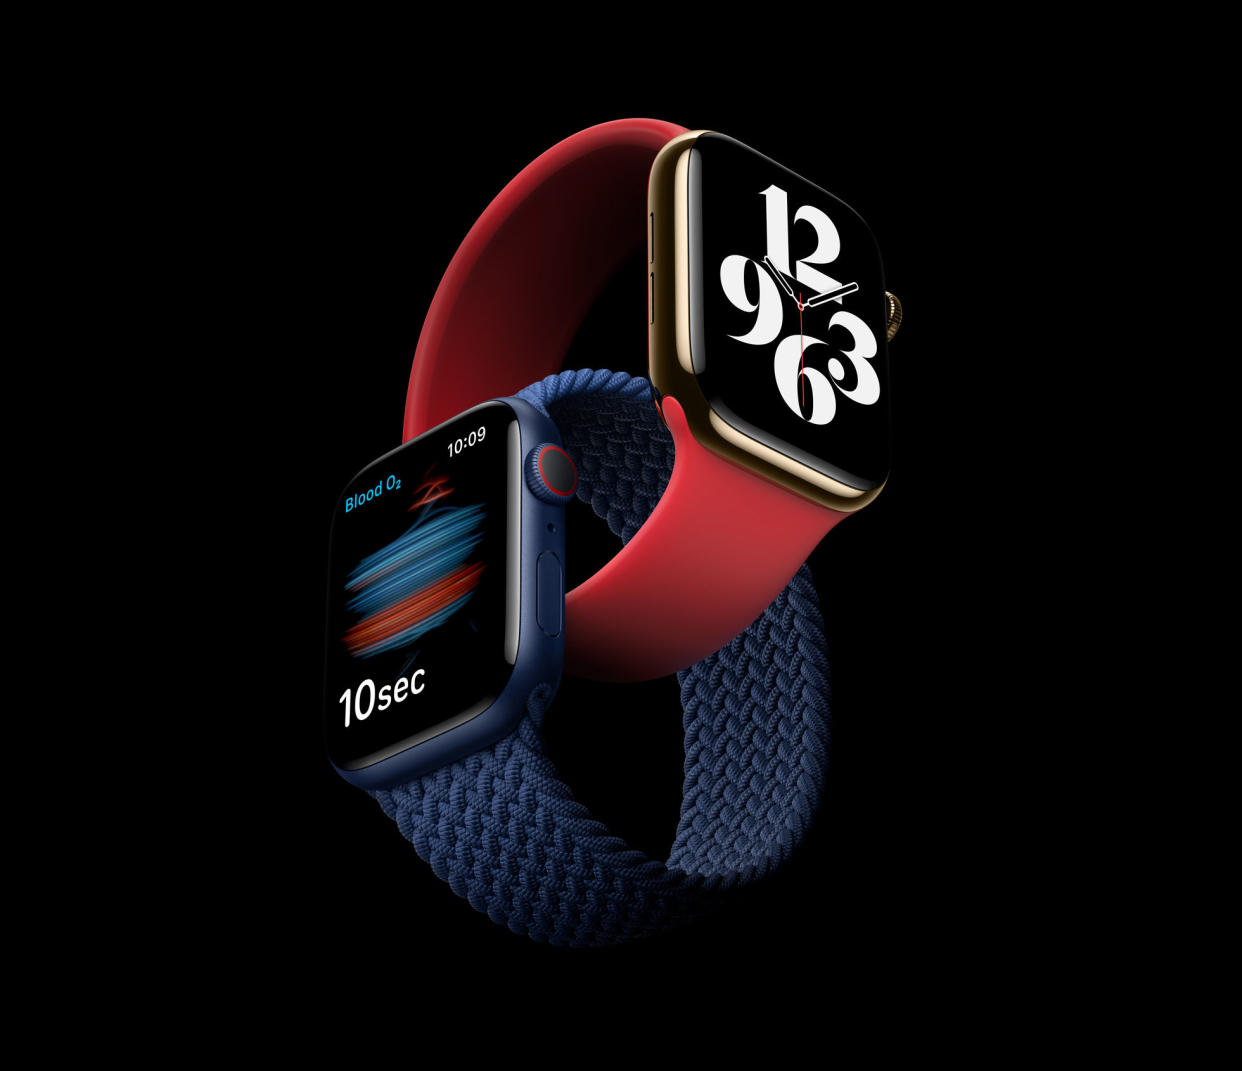 The Apple Watch Series 6 featuring a new Blood Oxygen sensor and app. 